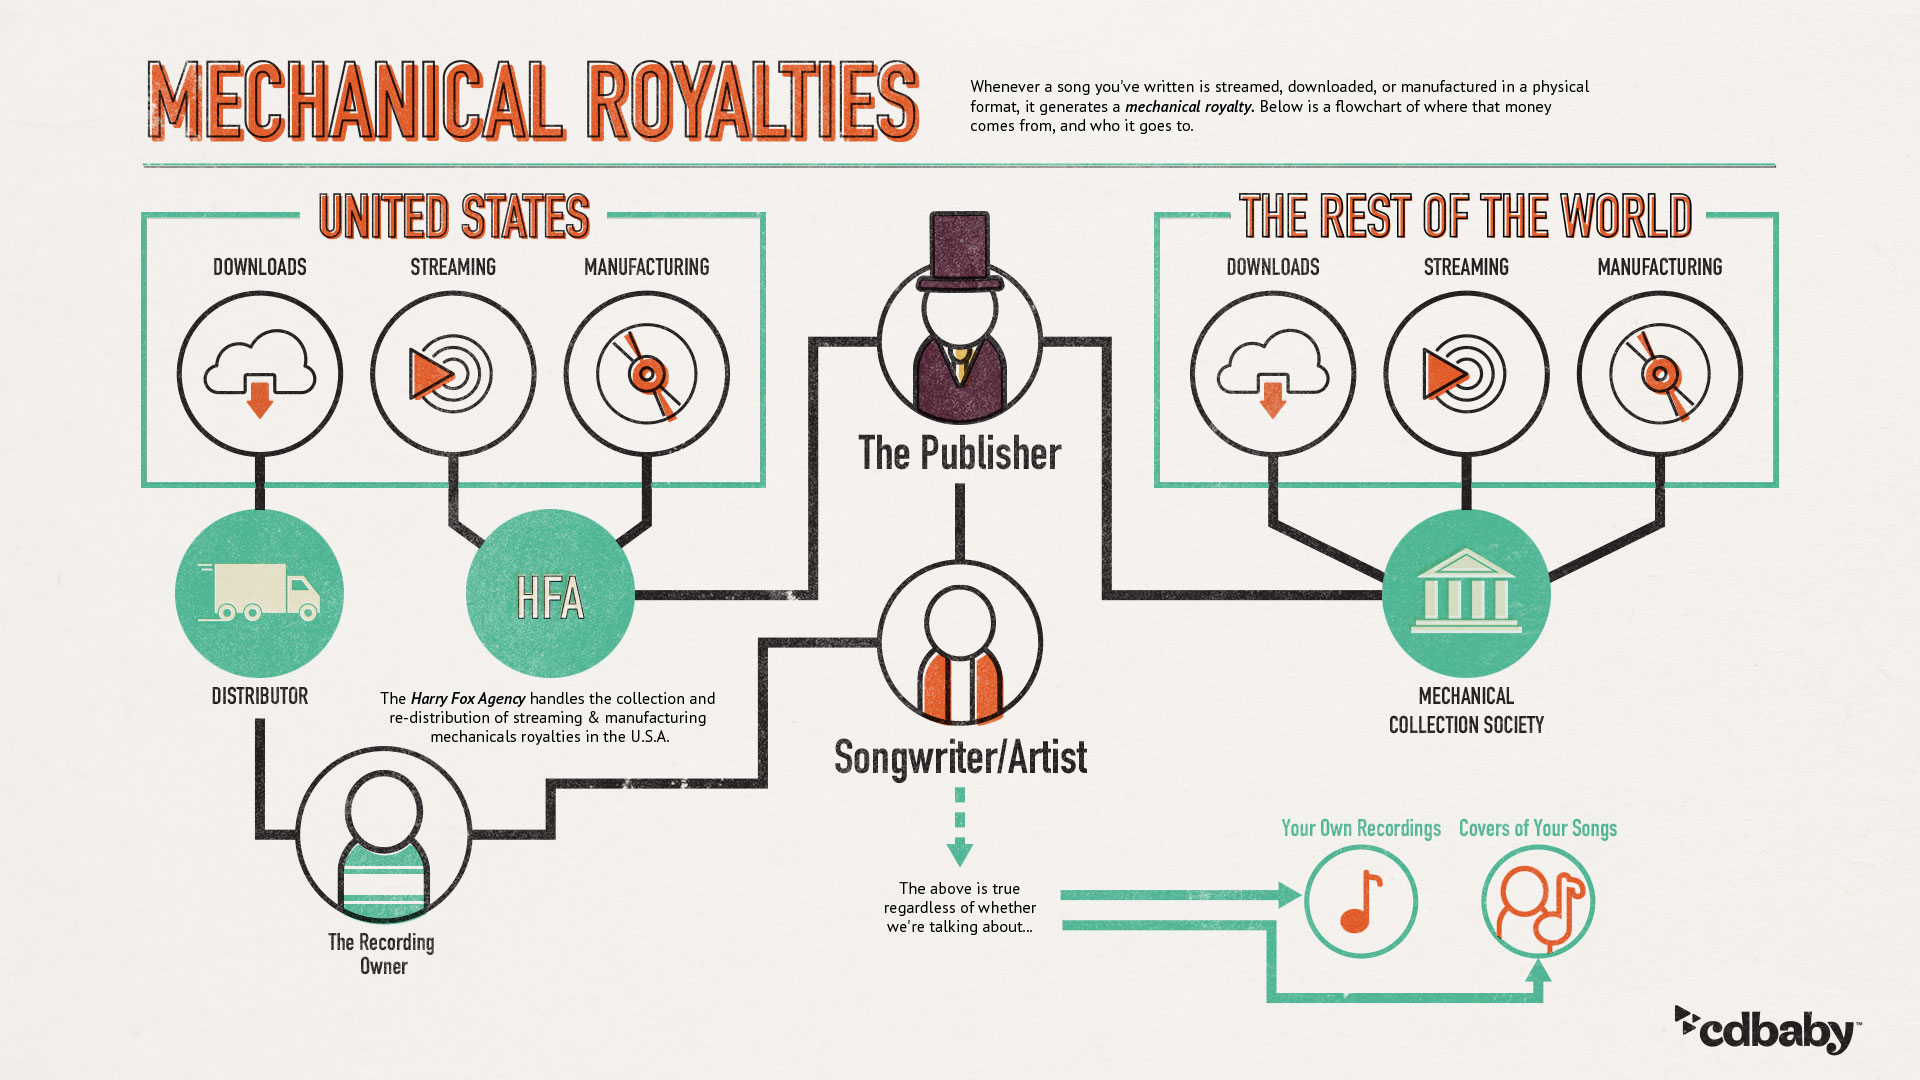 How mechanical royalties are paid to music publishers and songwriters